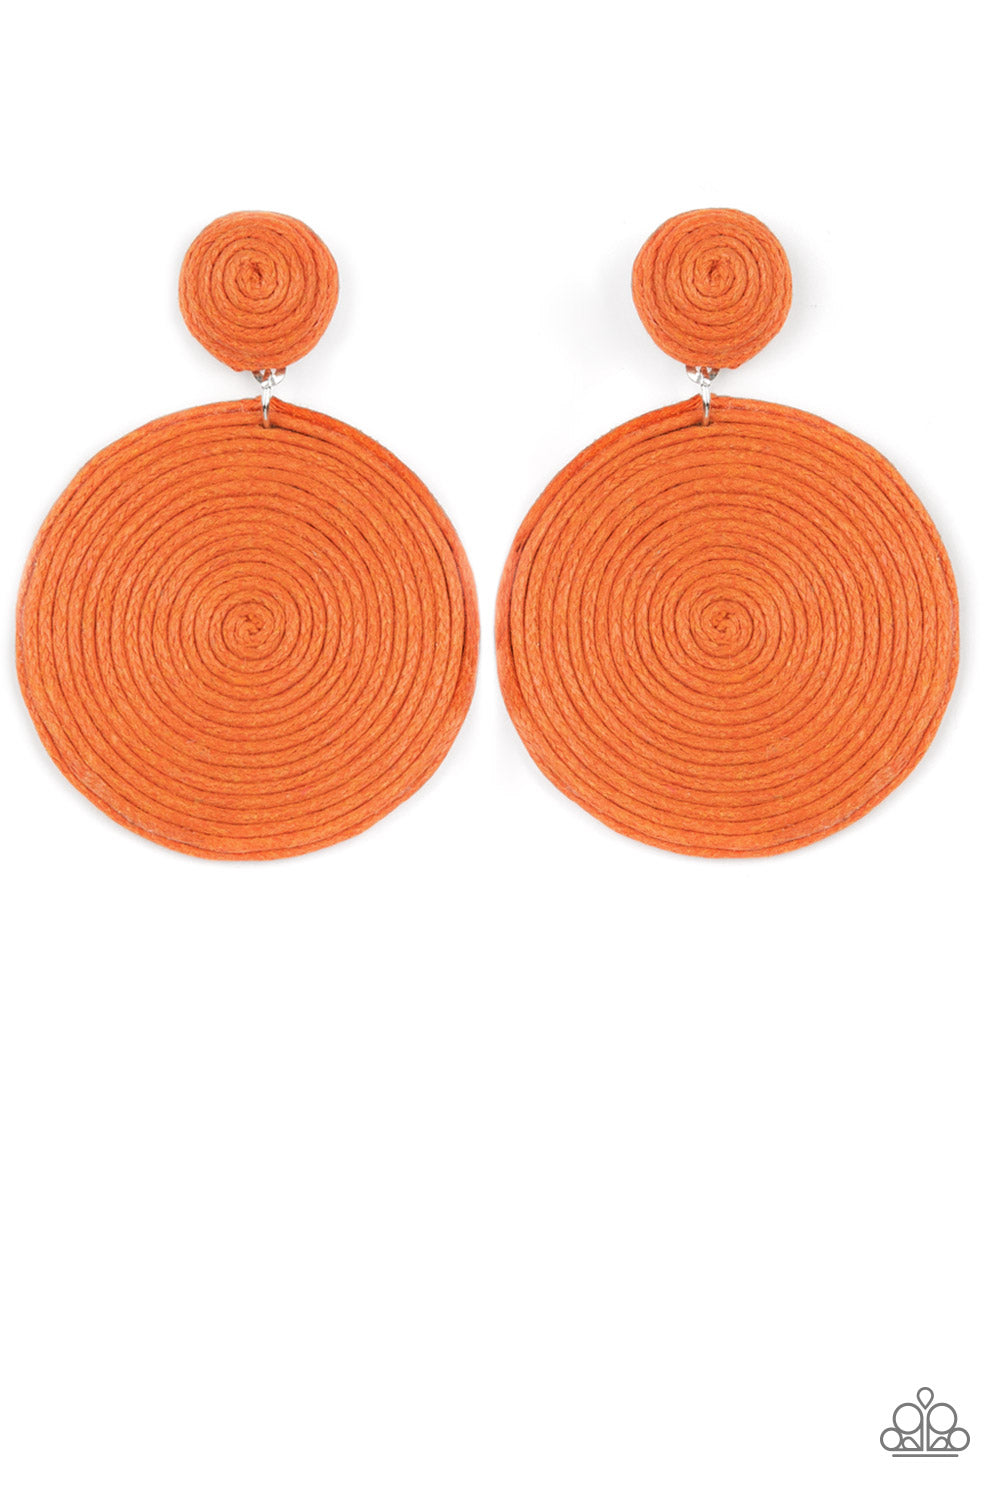 Circulate The Room - Orange ***COMING SOON*** - Bling With Crystal